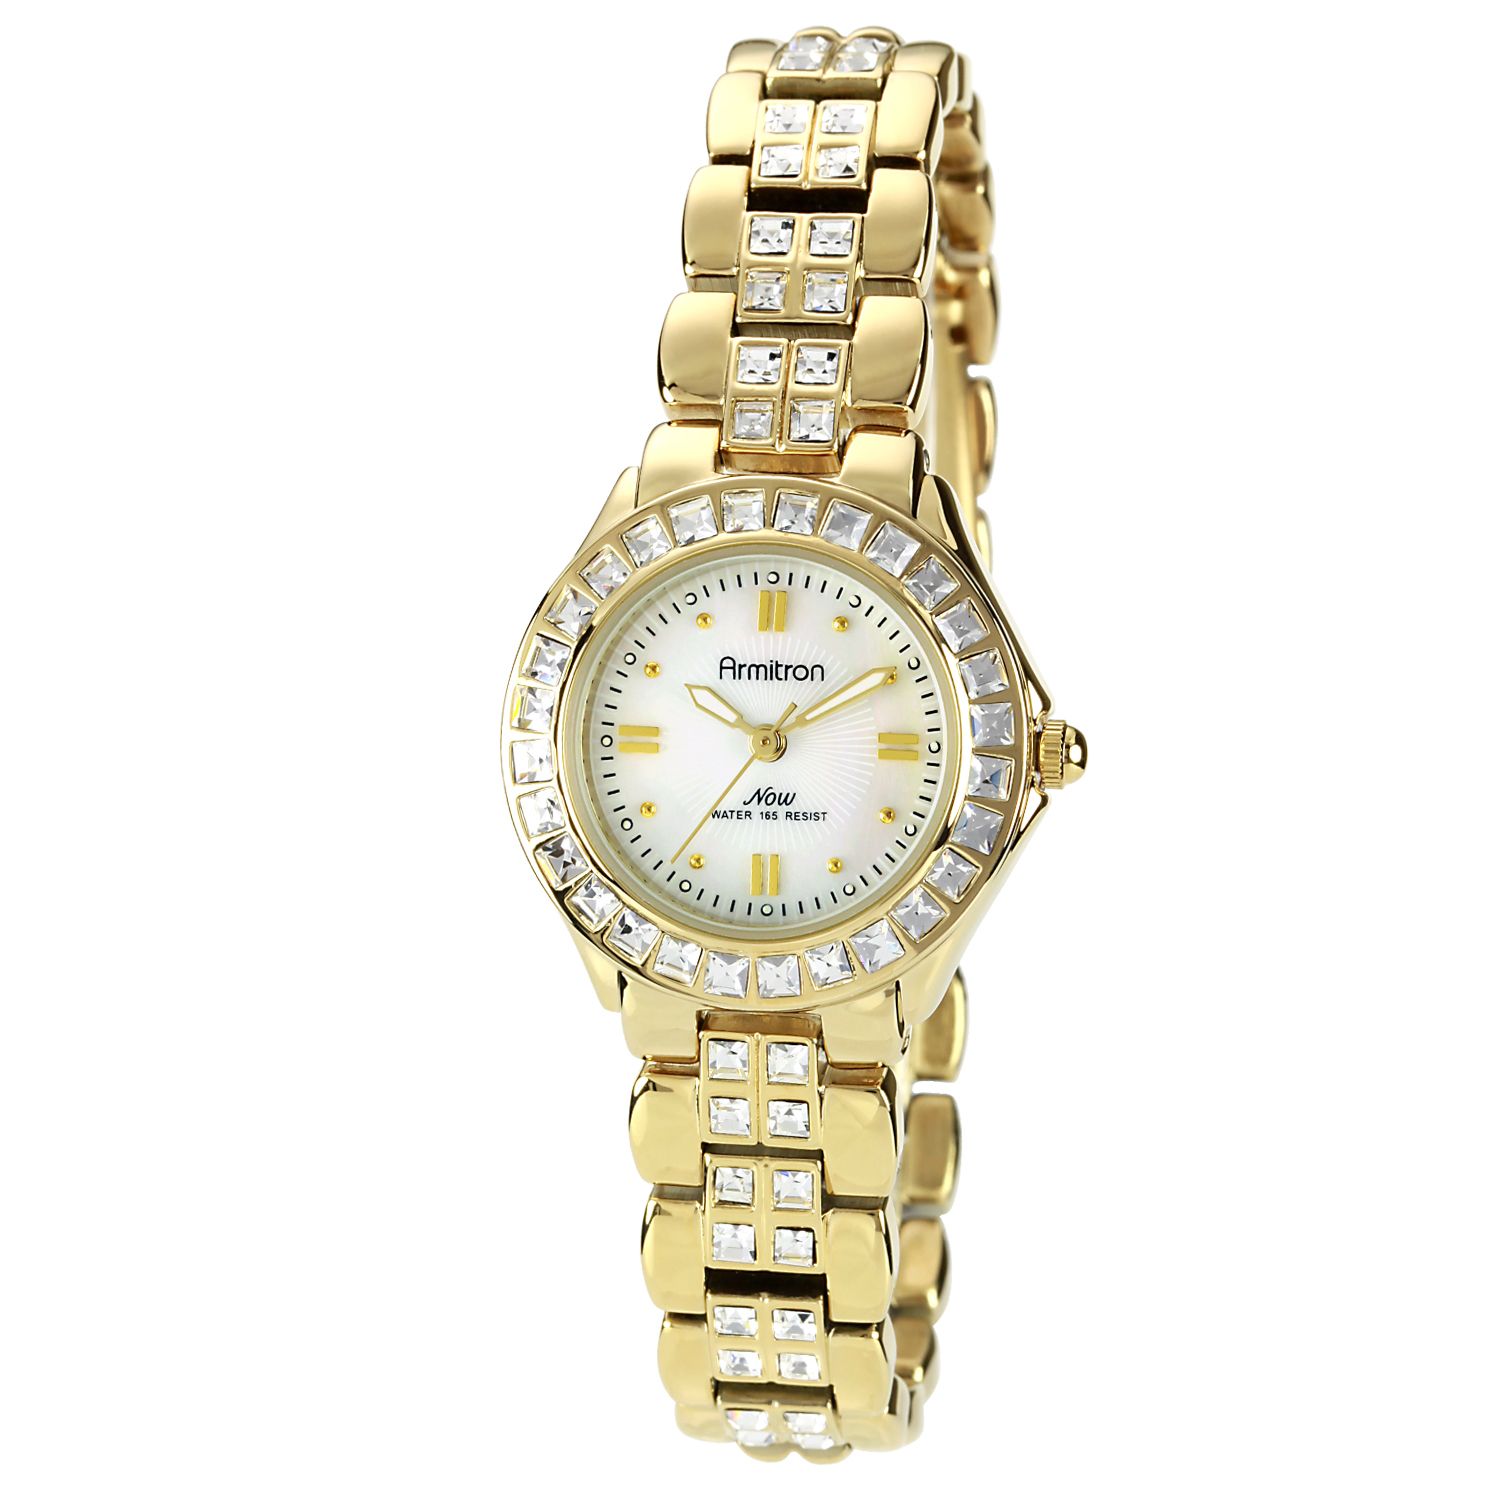 0086702442577 - LADIES' SWAROVSKI CRYSTAL ACCENT WATCH W/ROUND GOLD-TONE CASE MOTHER-OF-PEARL DIAL AND GT BRACELET BAND